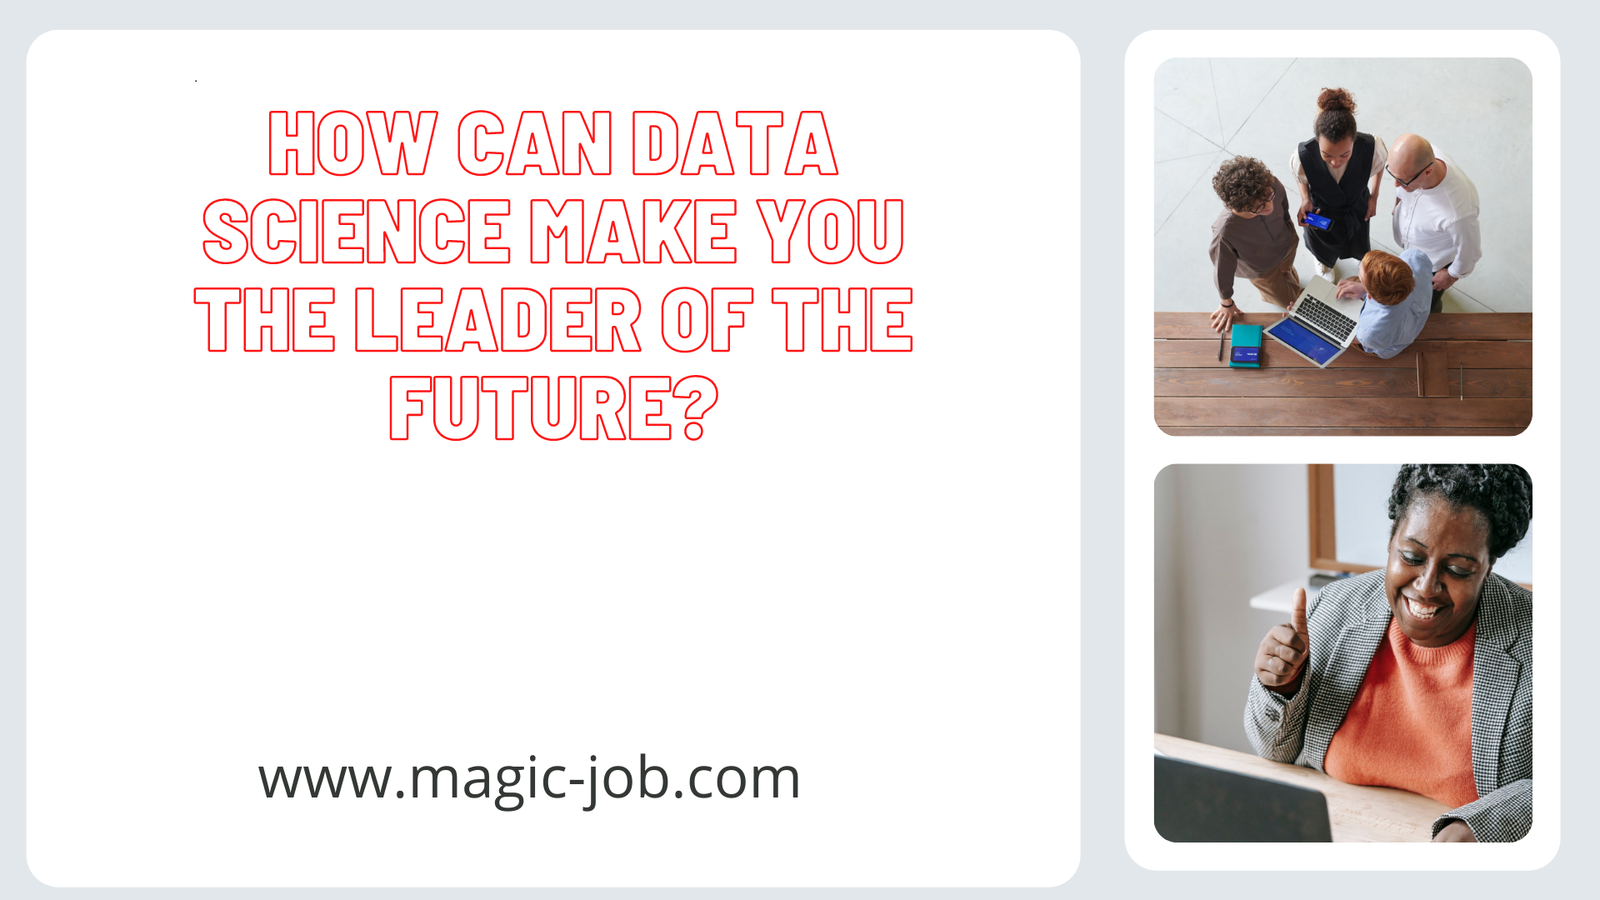 How Can Data Science Make You the Leader of the Future? image